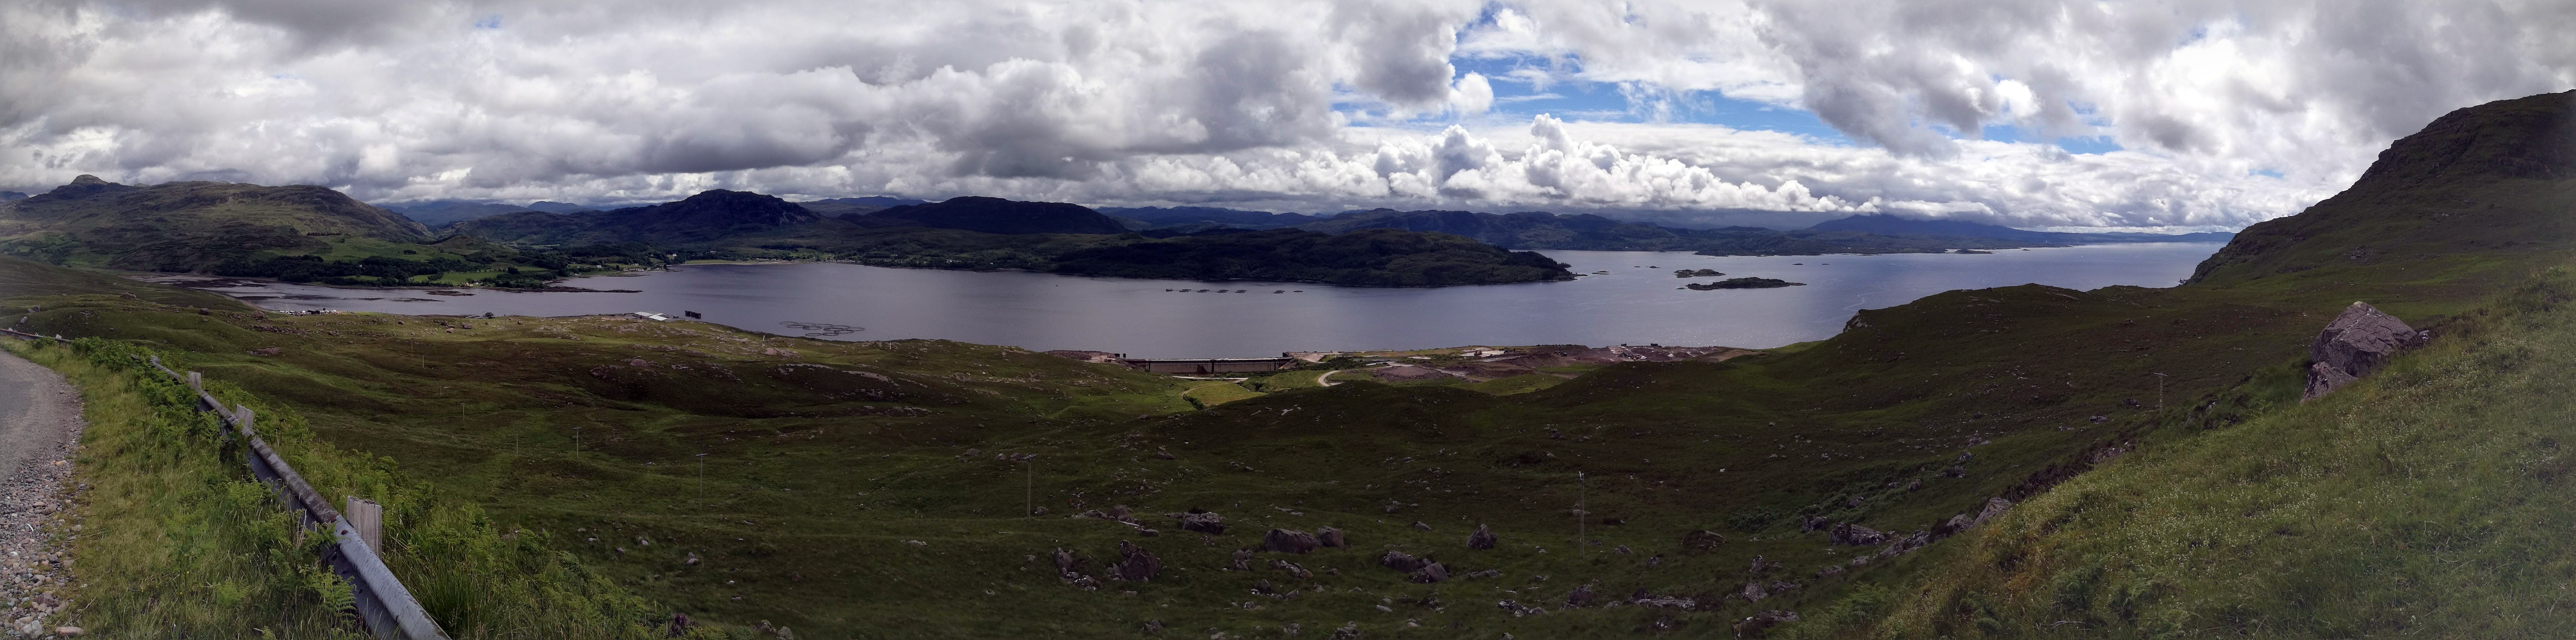 One of the views en route to Applecross